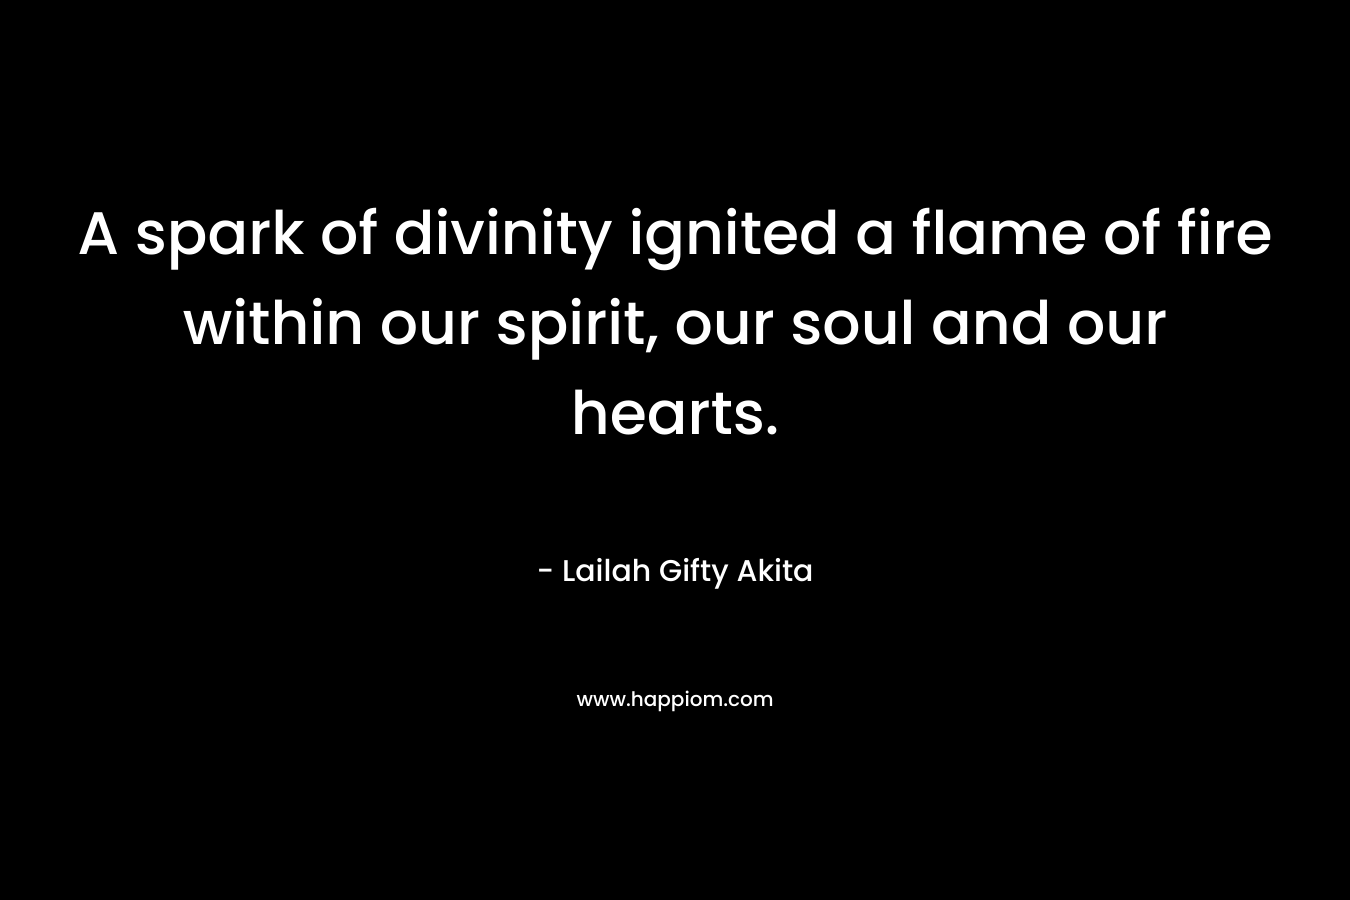 A spark of divinity ignited a flame of fire within our spirit, our soul and our hearts. – Lailah Gifty Akita